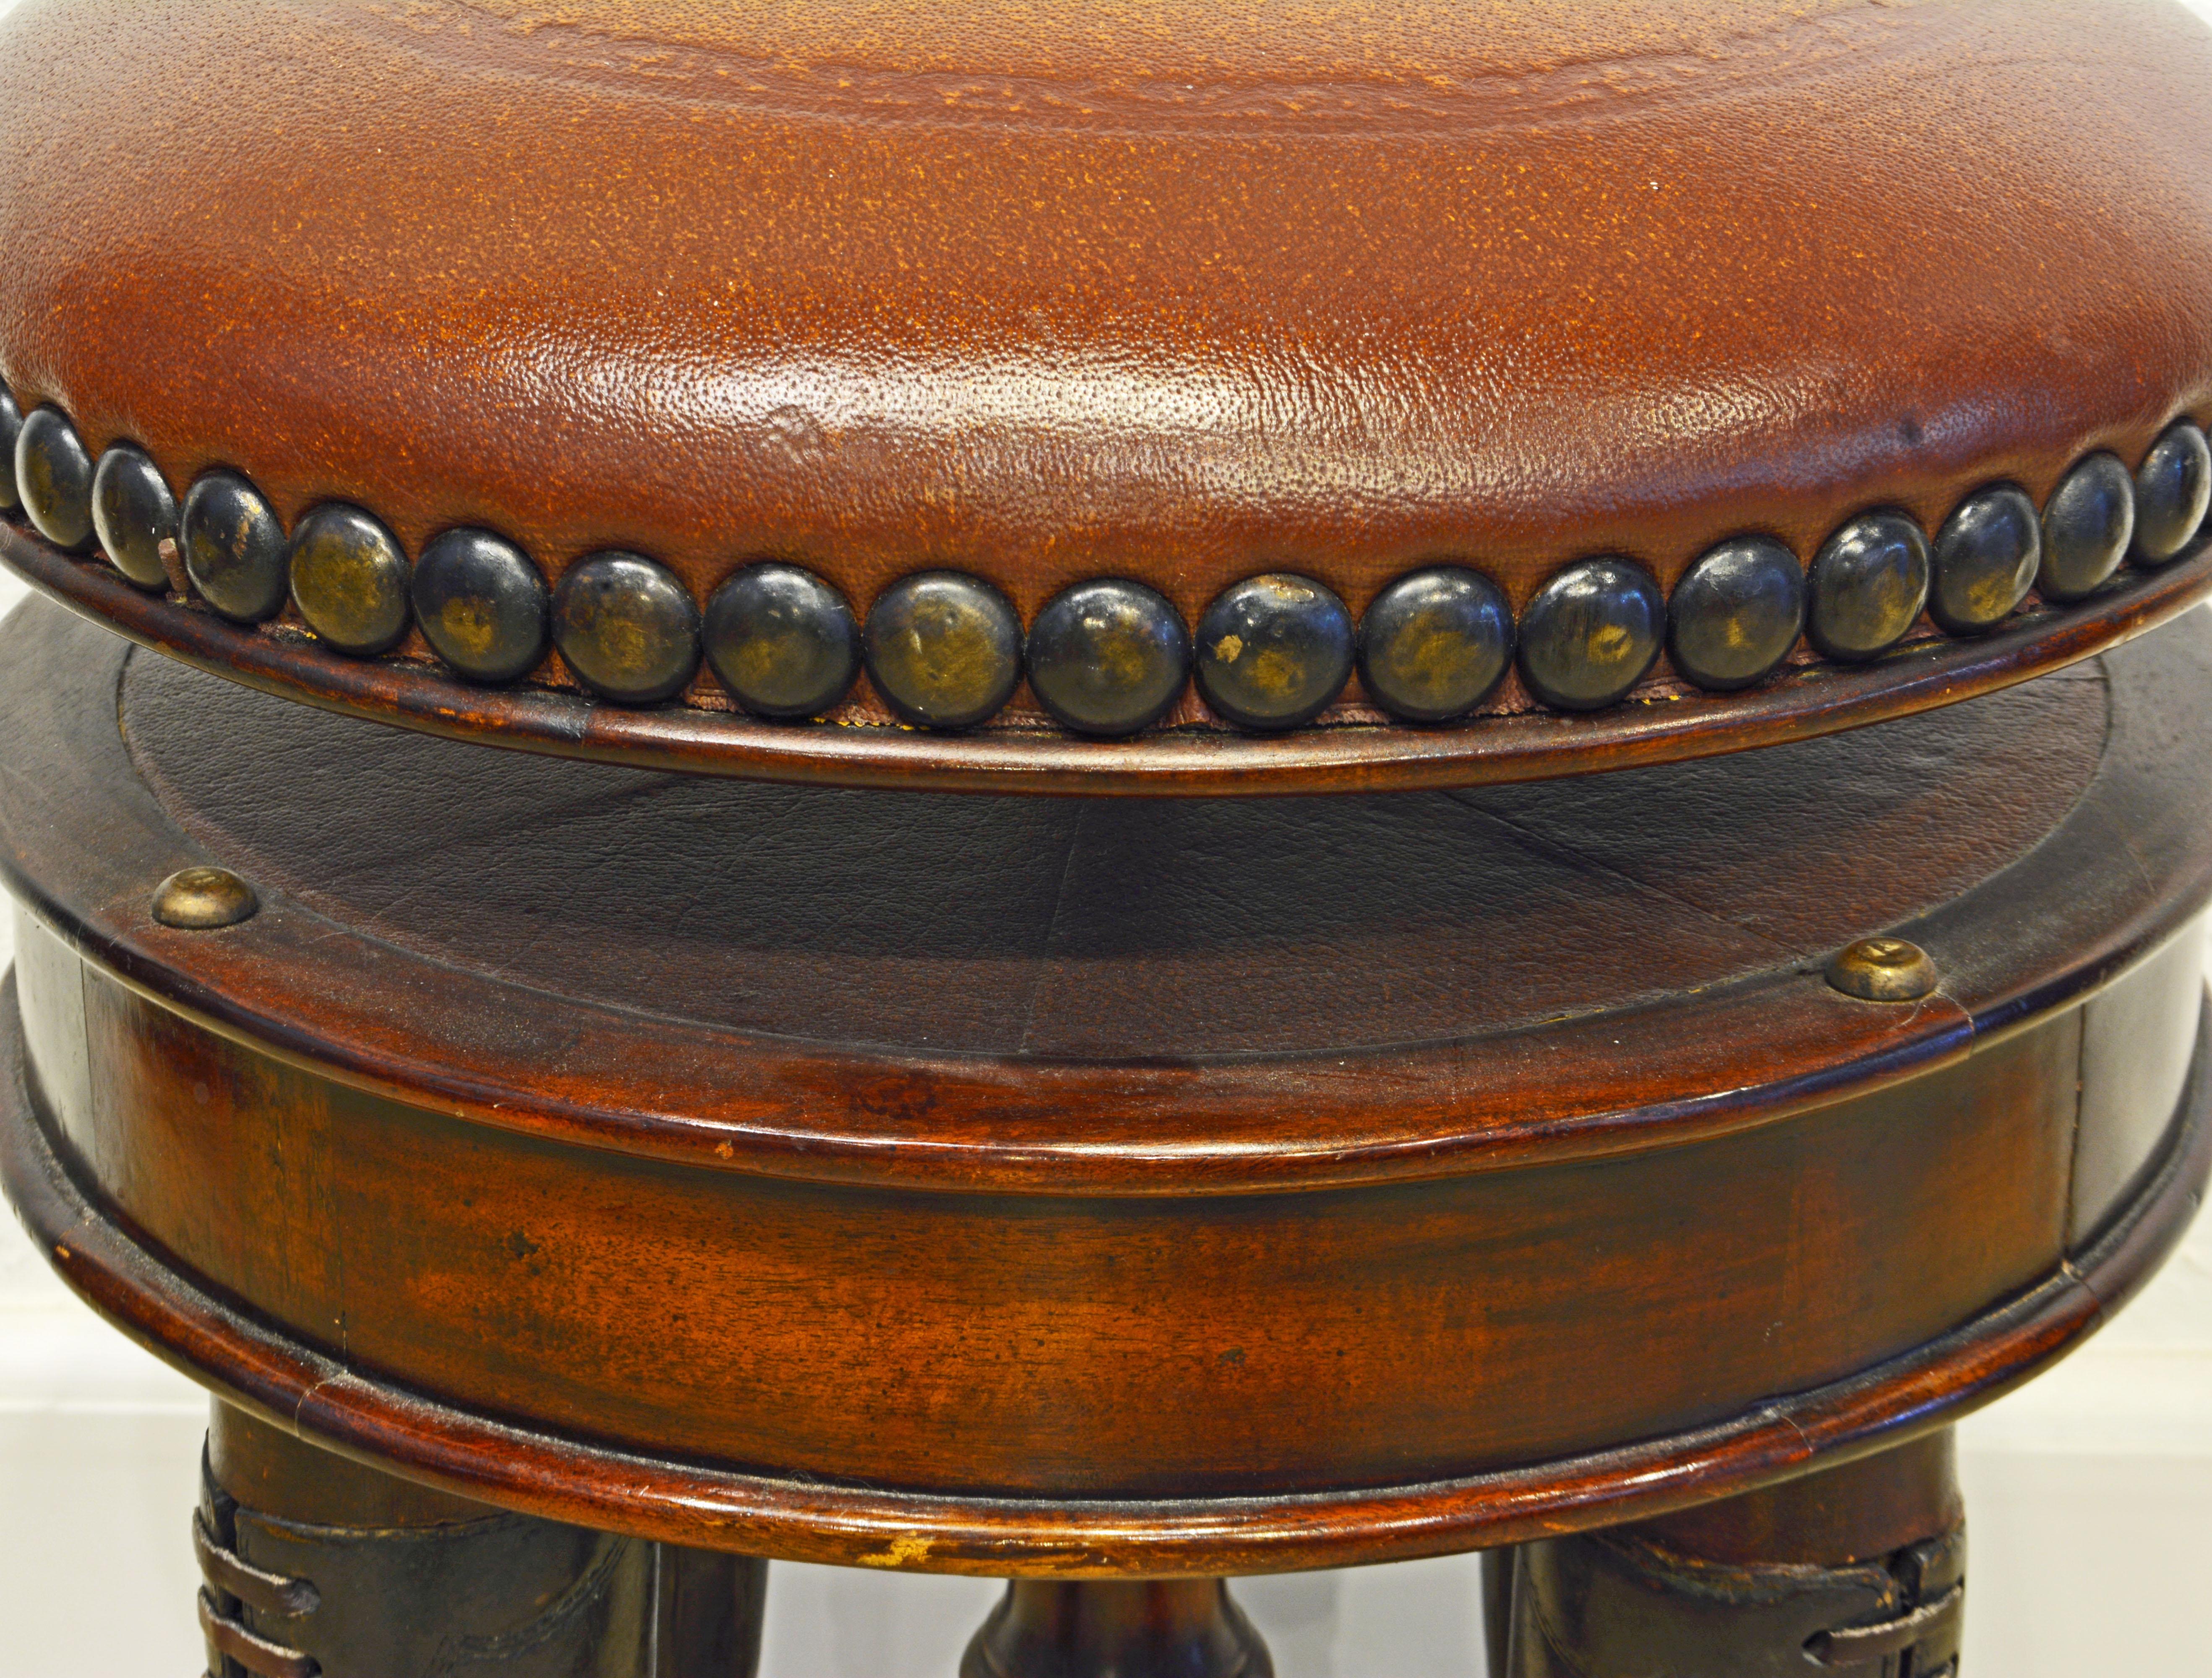 19th Century French Adjustable Leather Piano Stool on Bronze Legs in He Form of Ladies Boots